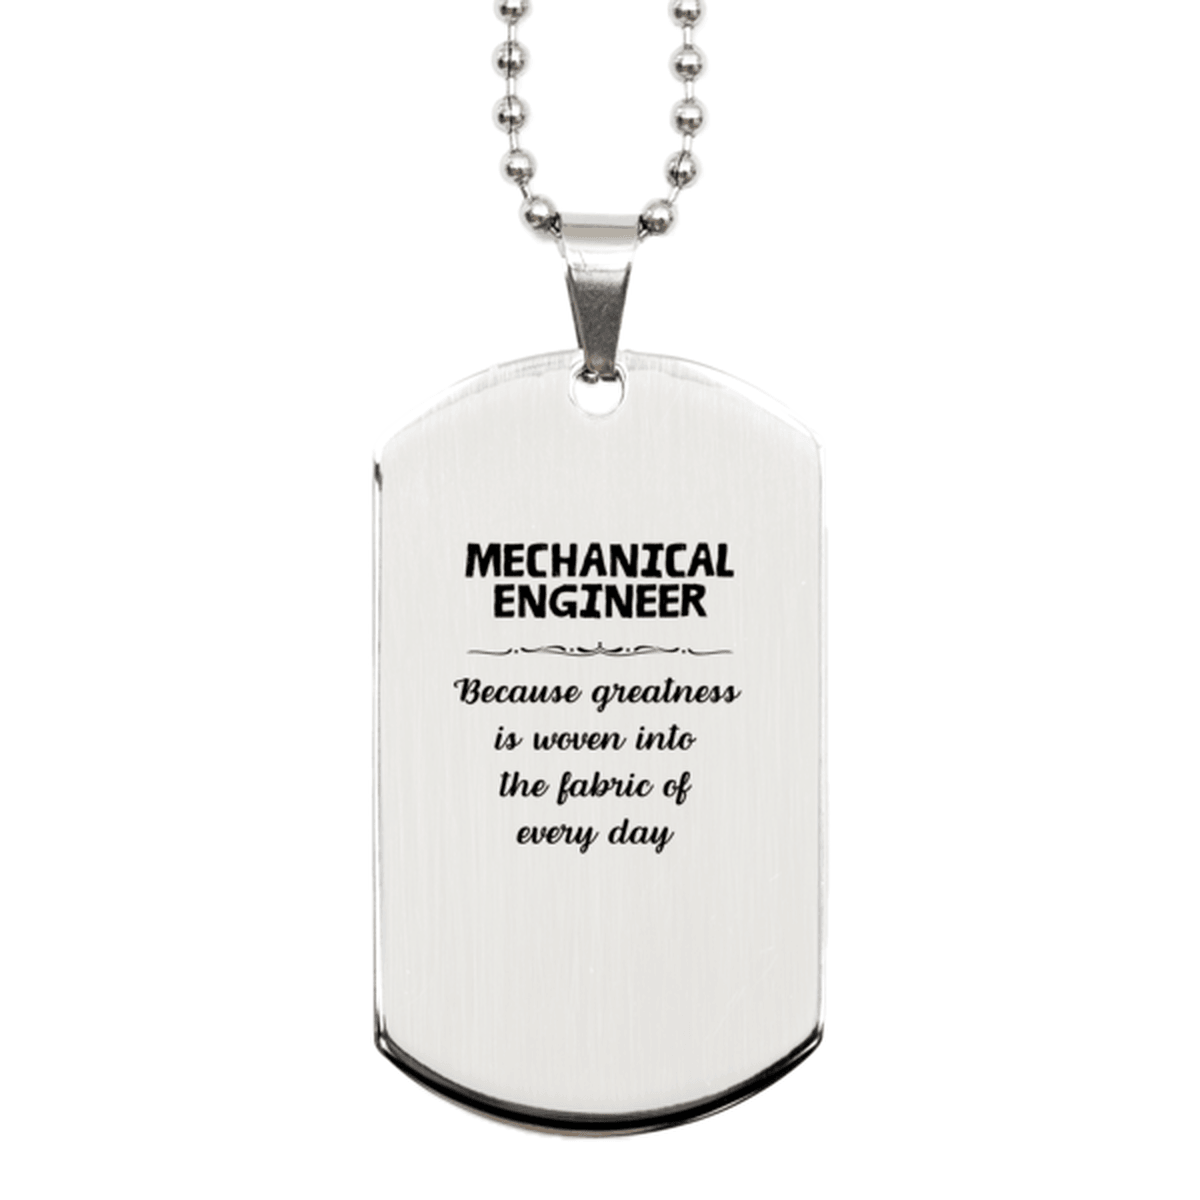 Sarcastic Mechanical Engineer Silver Dog Tag Gifts, Christmas Holiday Gifts for Mechanical Engineer Birthday, Mechanical Engineer: Because greatness is woven into the fabric of every day, Coworkers, Friends - Mallard Moon Gift Shop